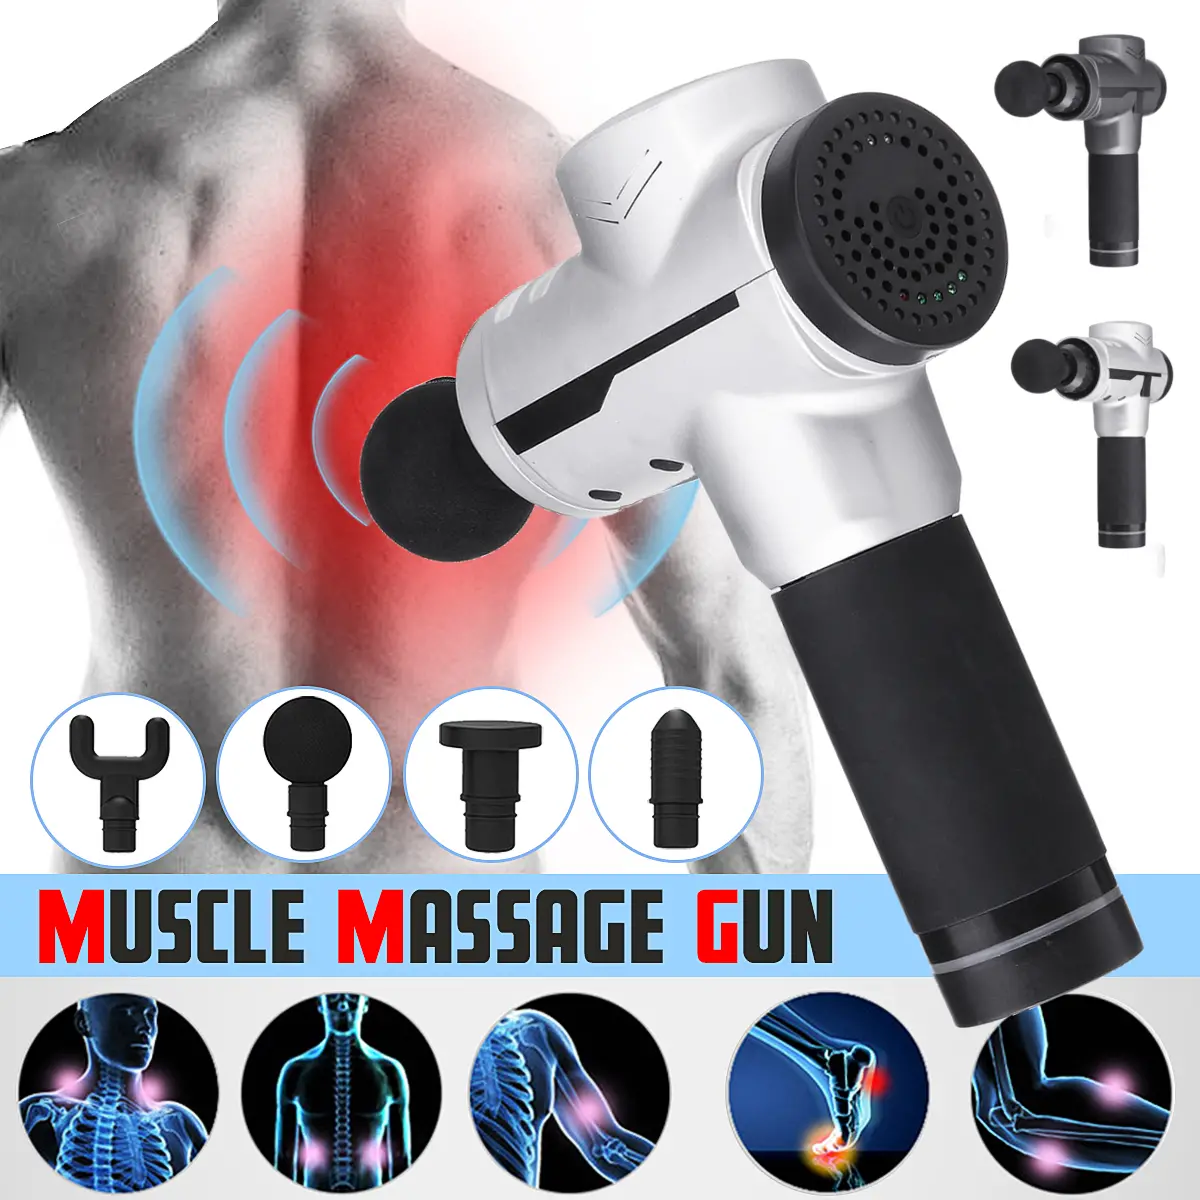 3 Speed Deep Tissue Muscle Massager Relaxation Vibration Electric Massager Cordless Percussion Massage G un Rechargeable Handheld Stimulation With 4 Head